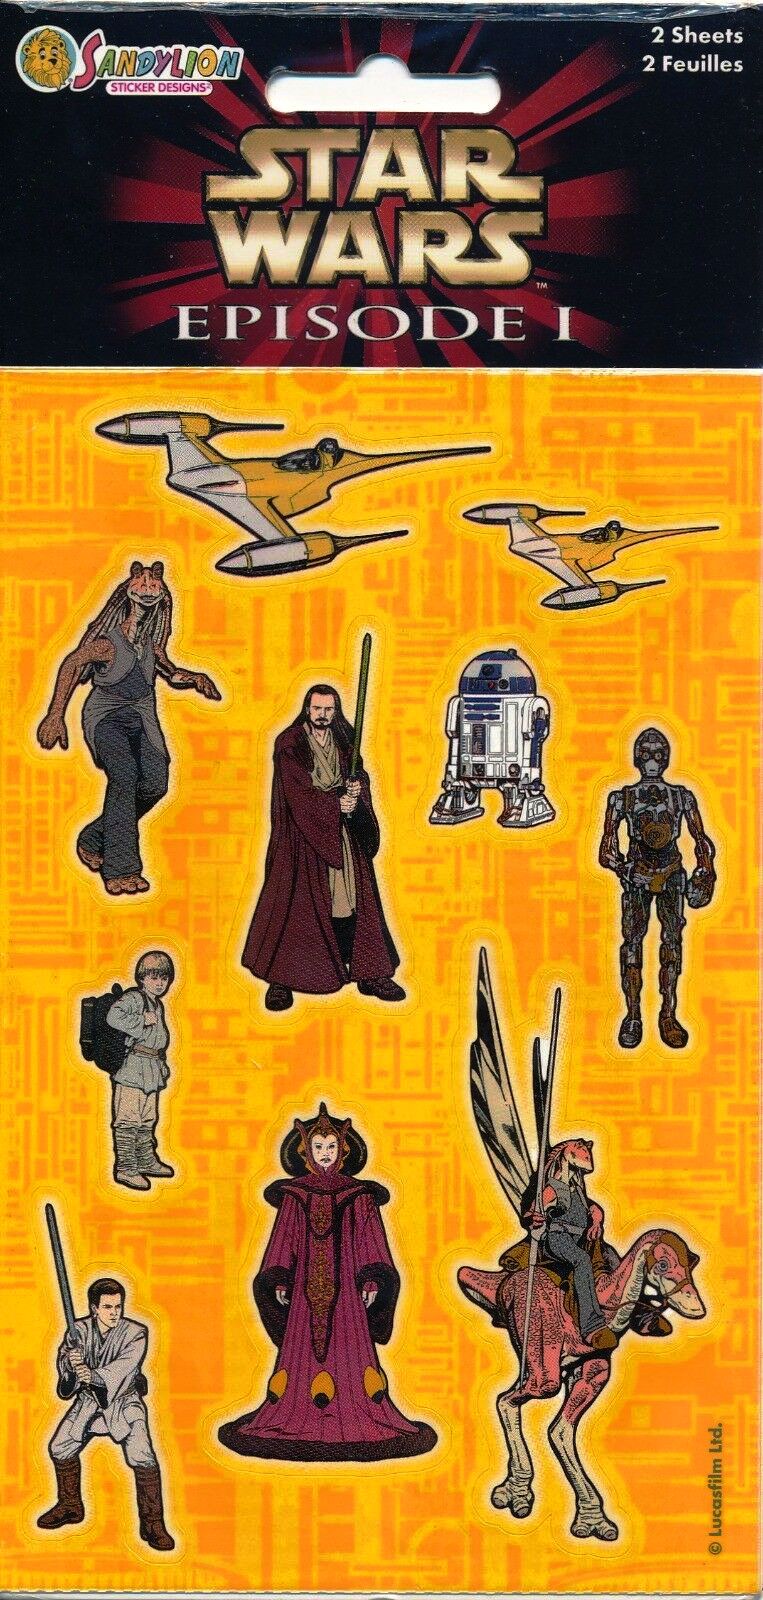 Star Wars Brand New in Pack Stickers Collectible Vintage 1998 Episode 1 Star Wars Vintage Collector Stickers